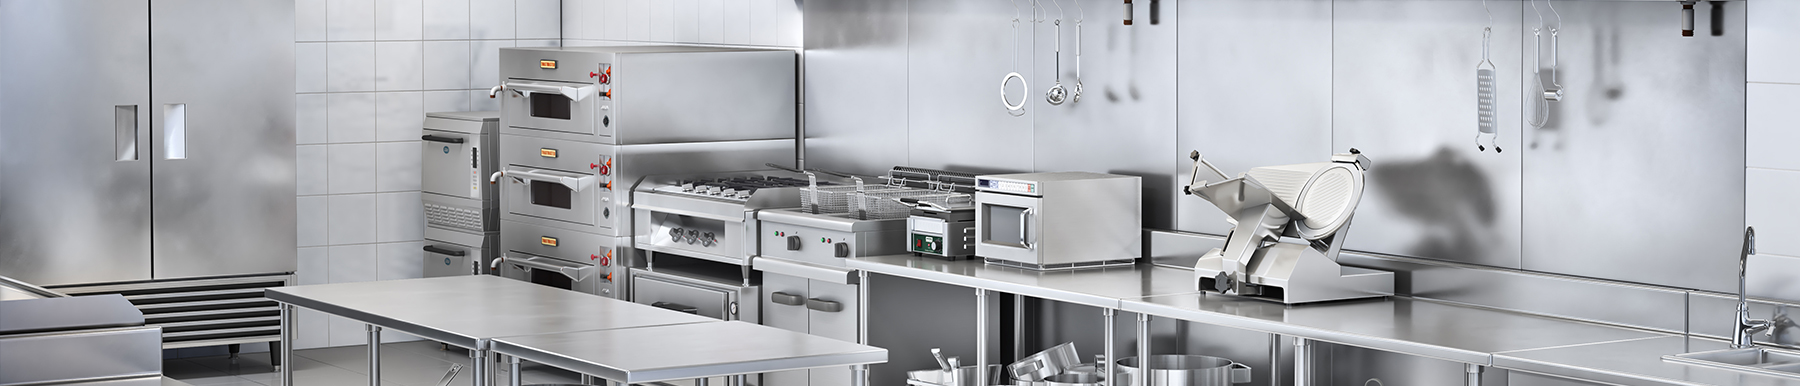 Catering Equipment Suppliers Near Carmarthenshire | H2 Catering Equipment Catering Equipment